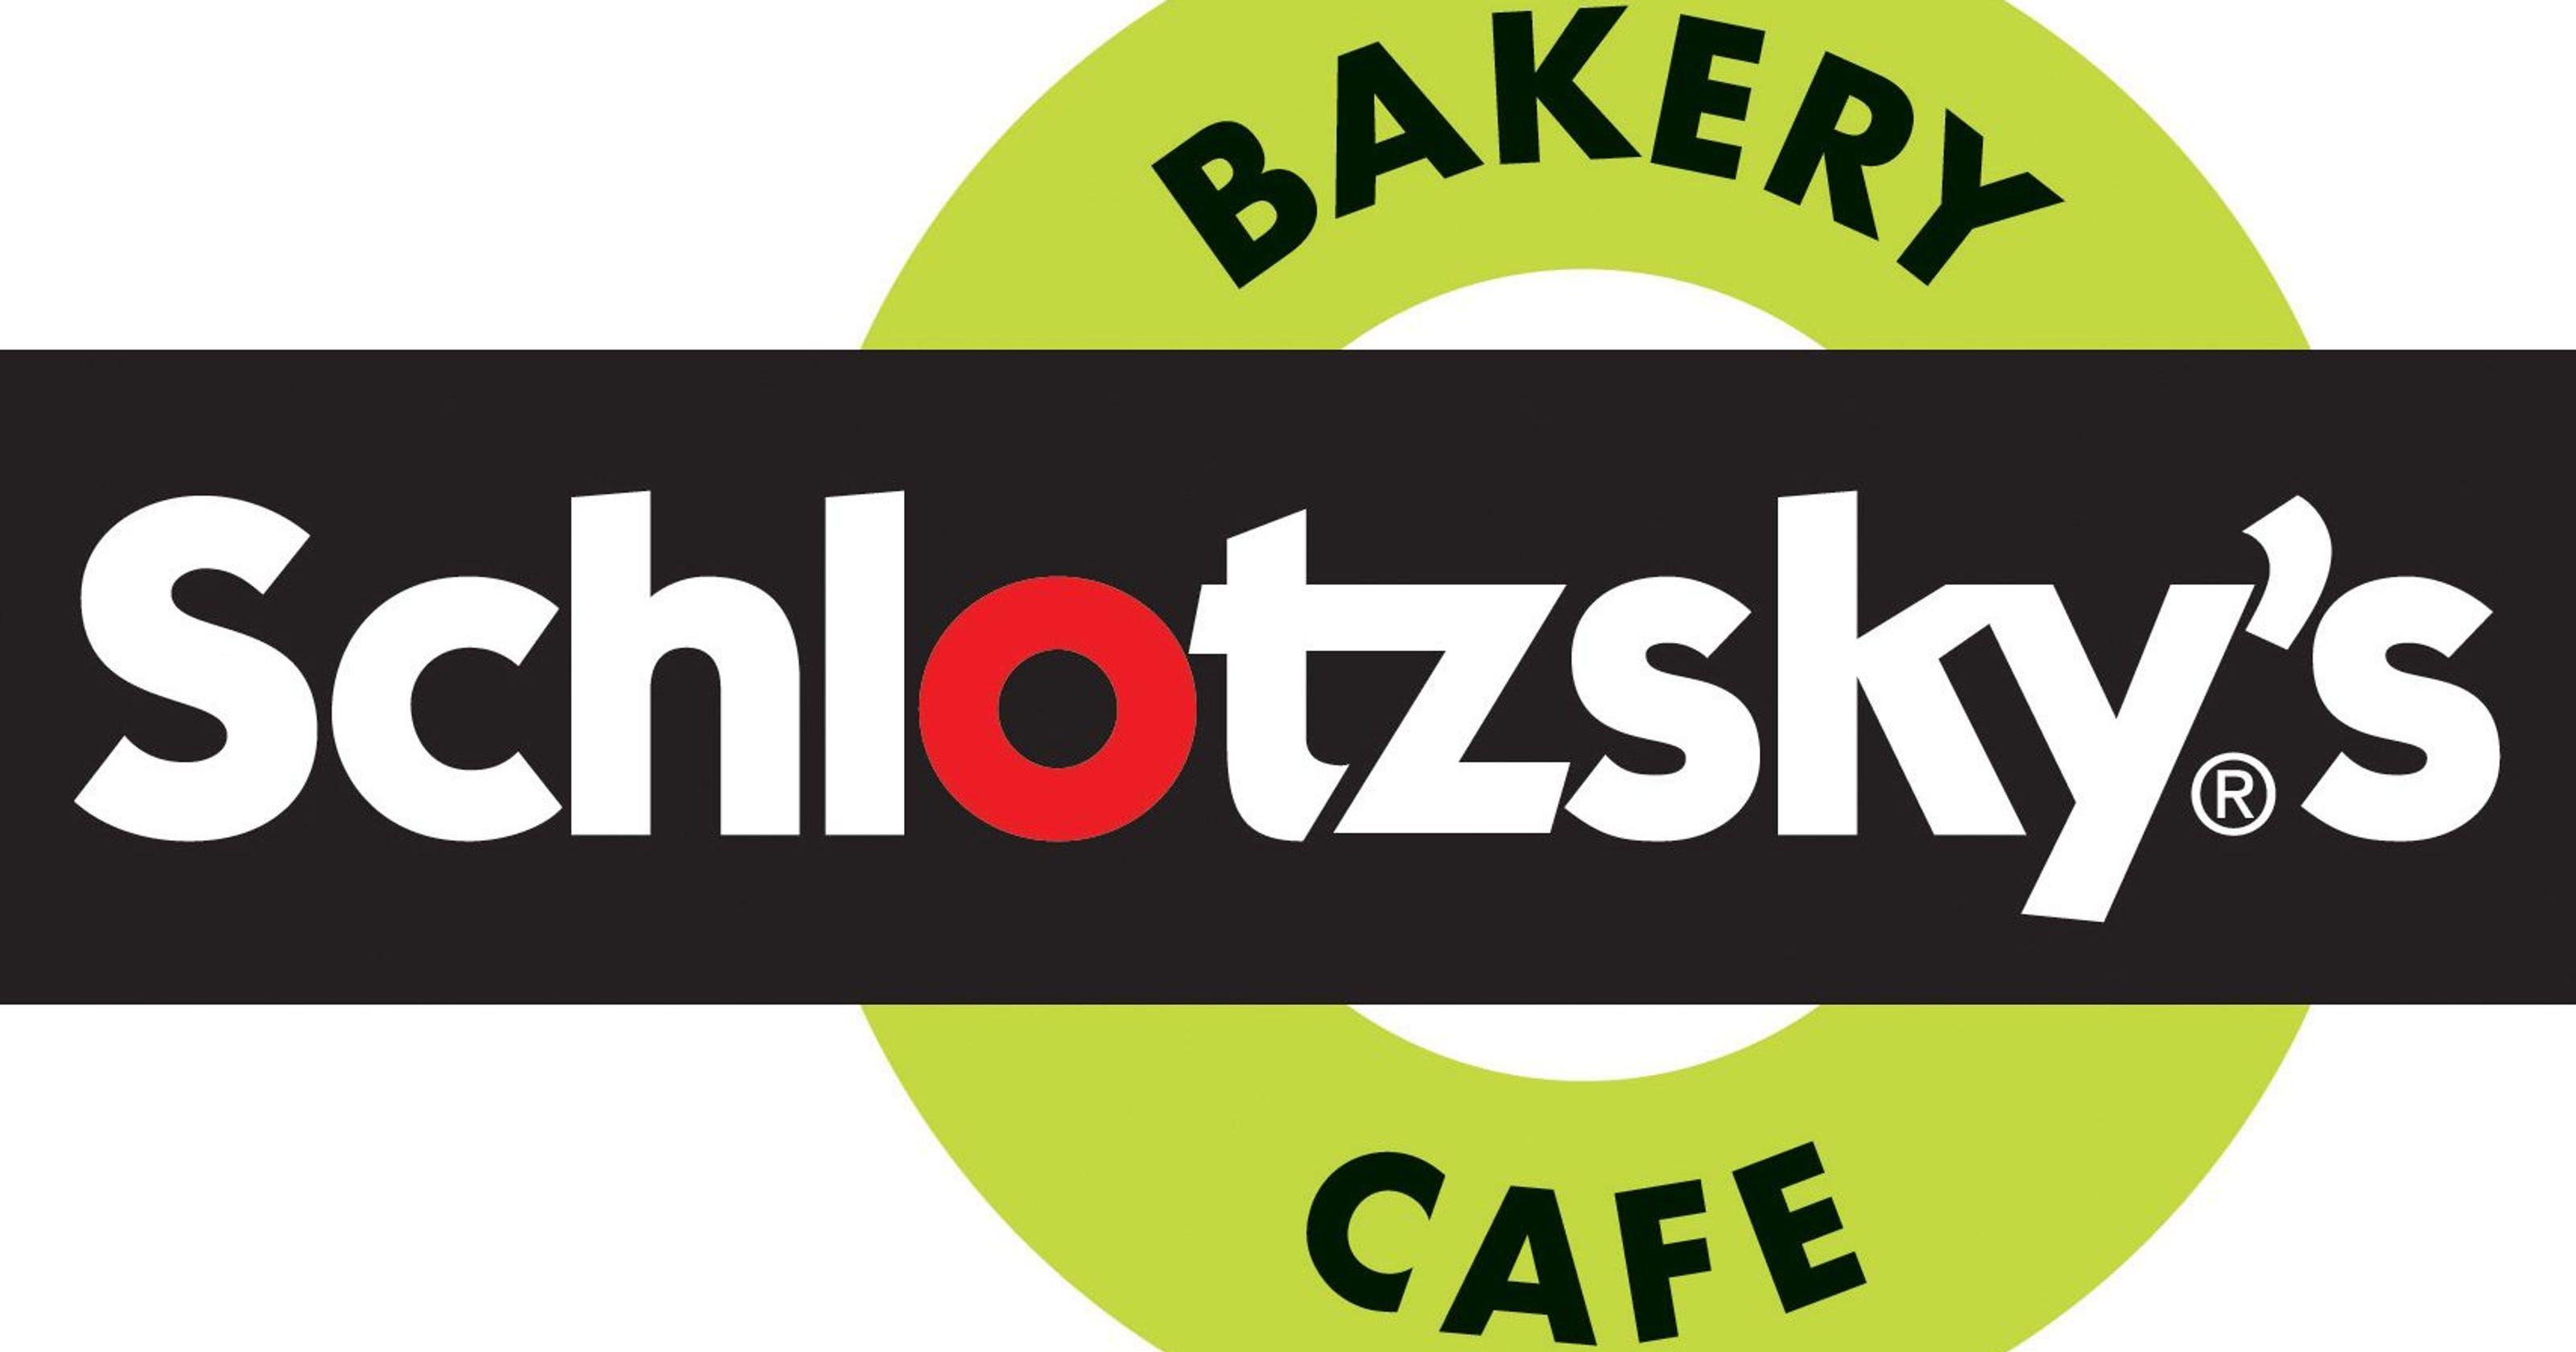 Schlotzsky's Logo - Opens Thursday: Schlotzsky's, and you could eat there free for a year